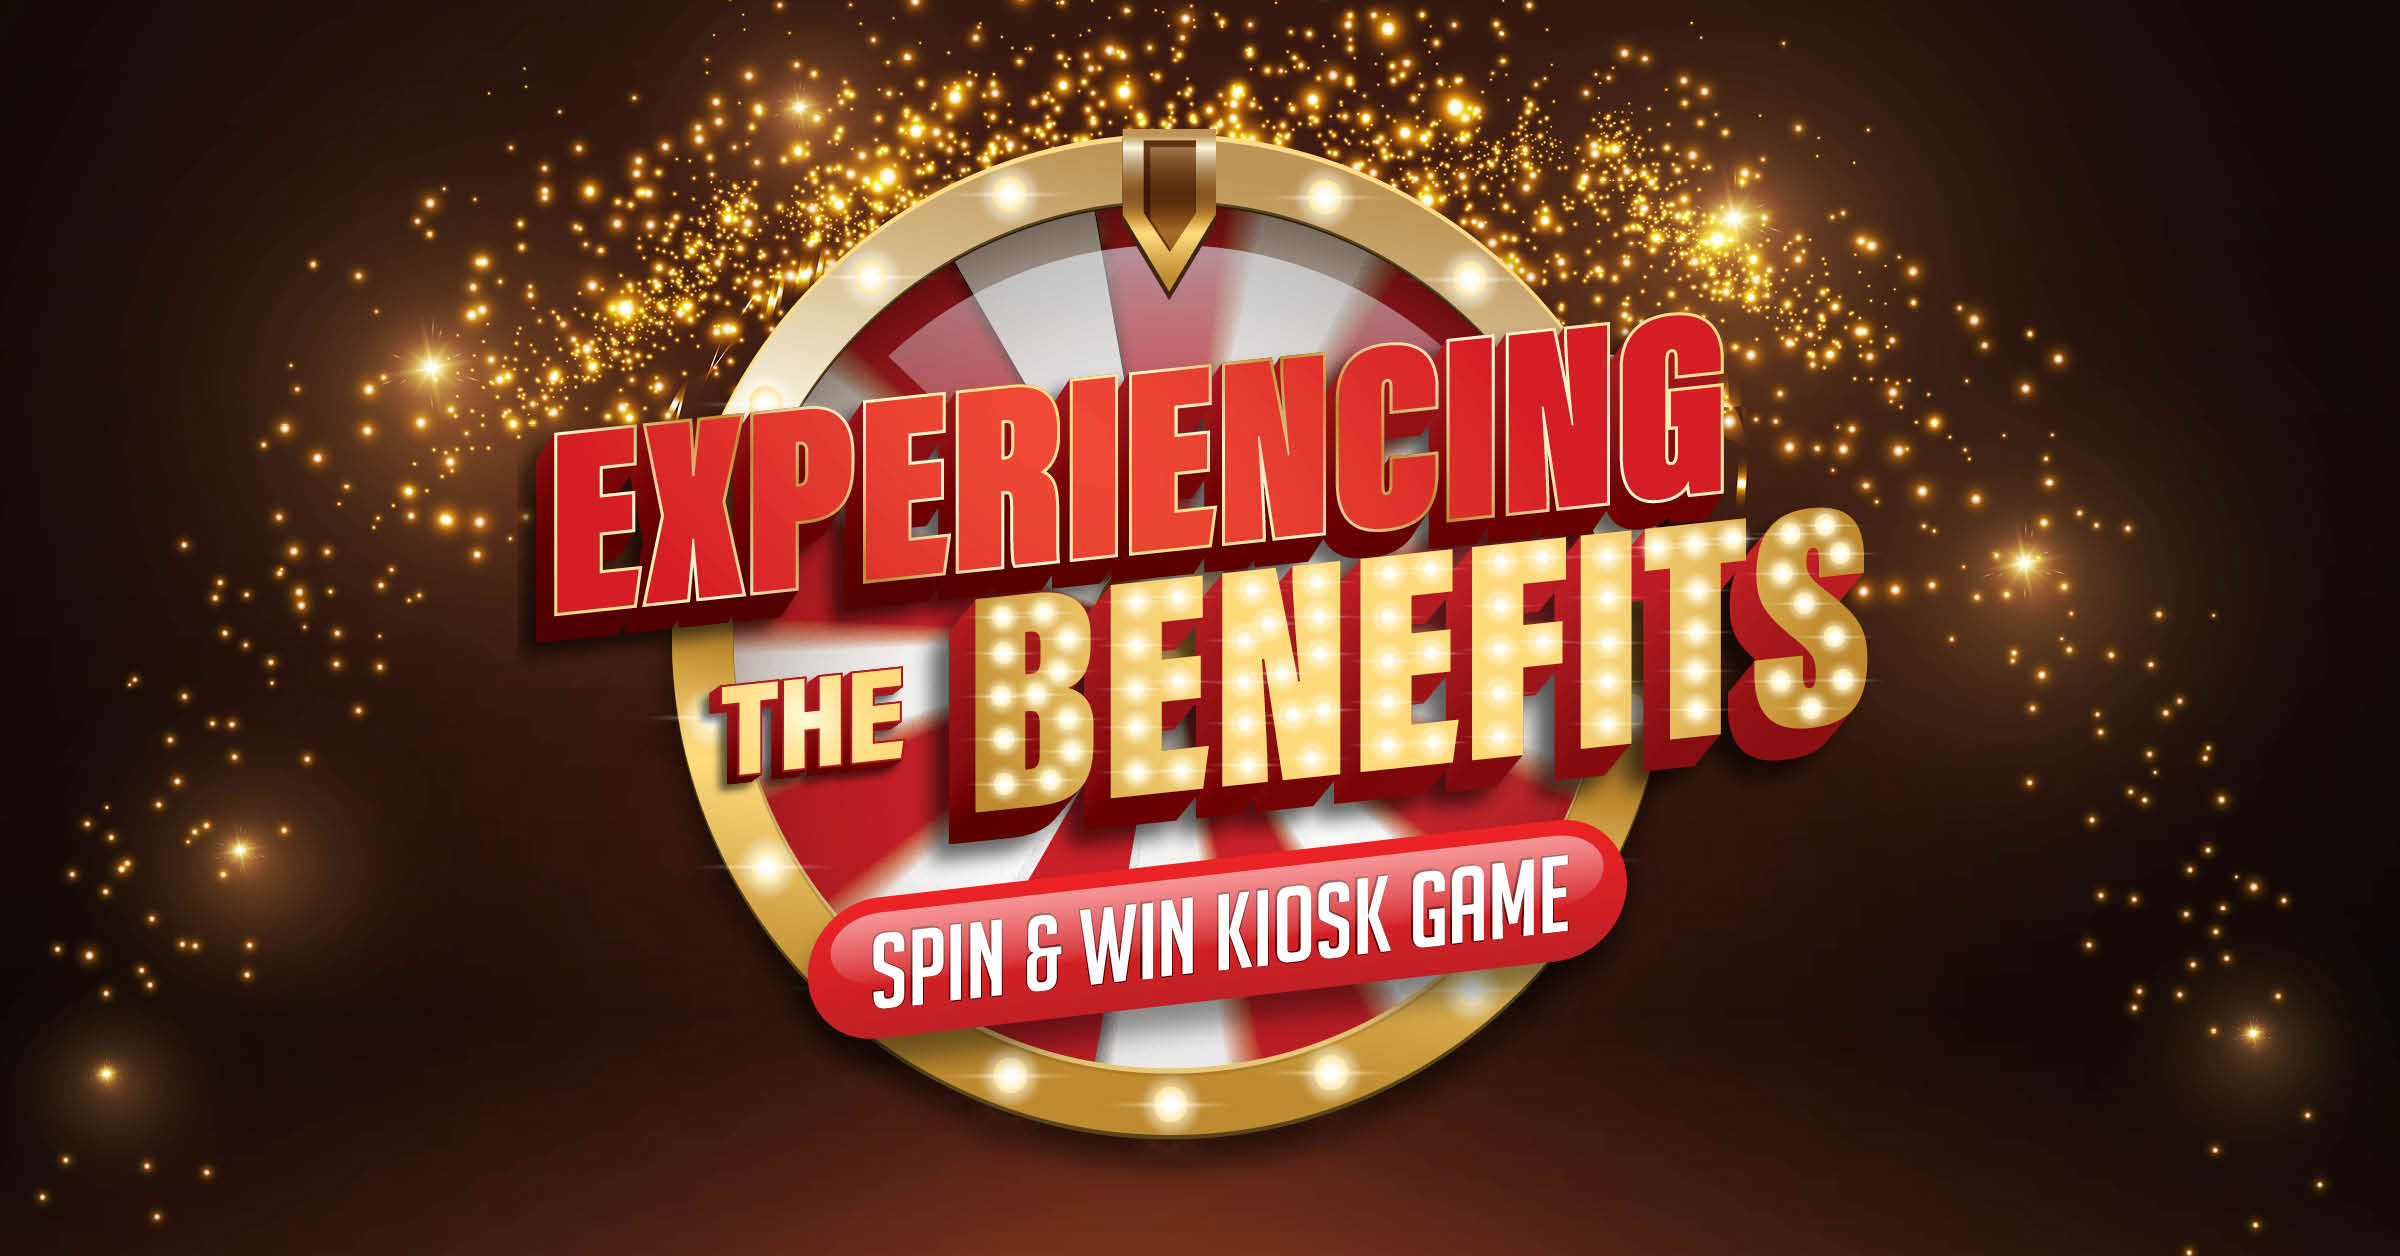 EXPERIENCING THE BENEFITS SPIN & WIN KIOSK GAME